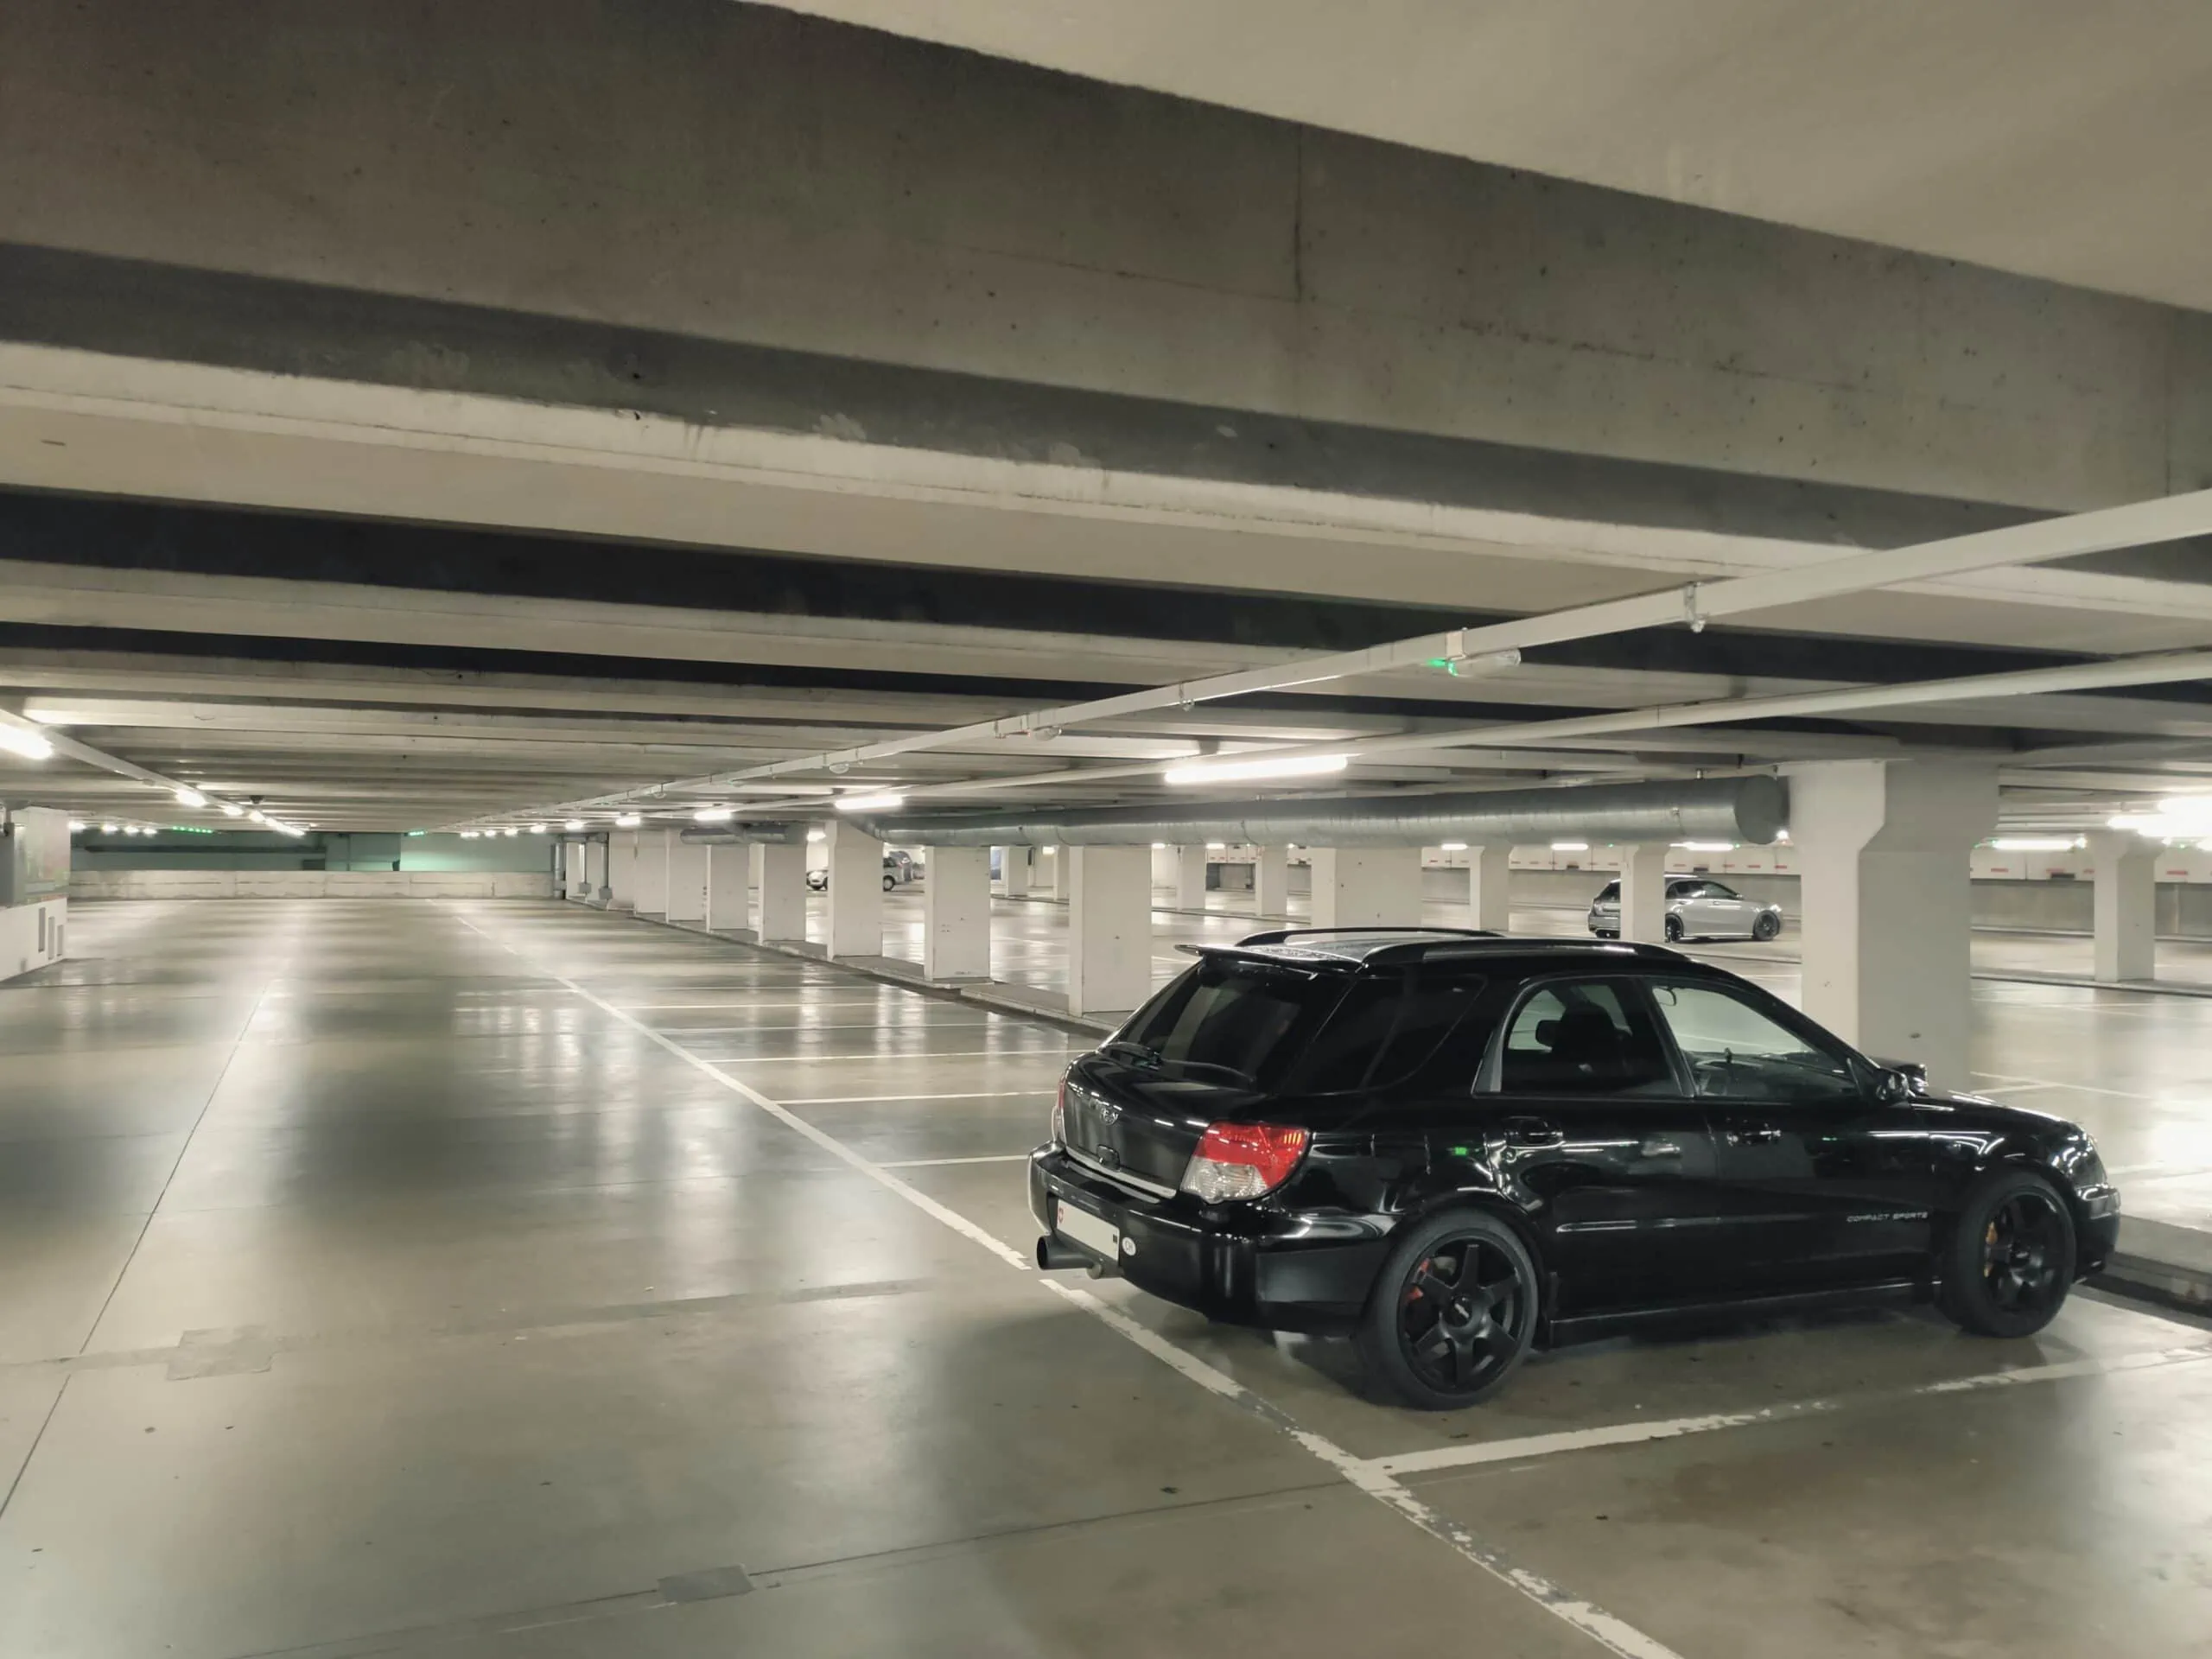 Car in parking garage protected by surveillance cameras